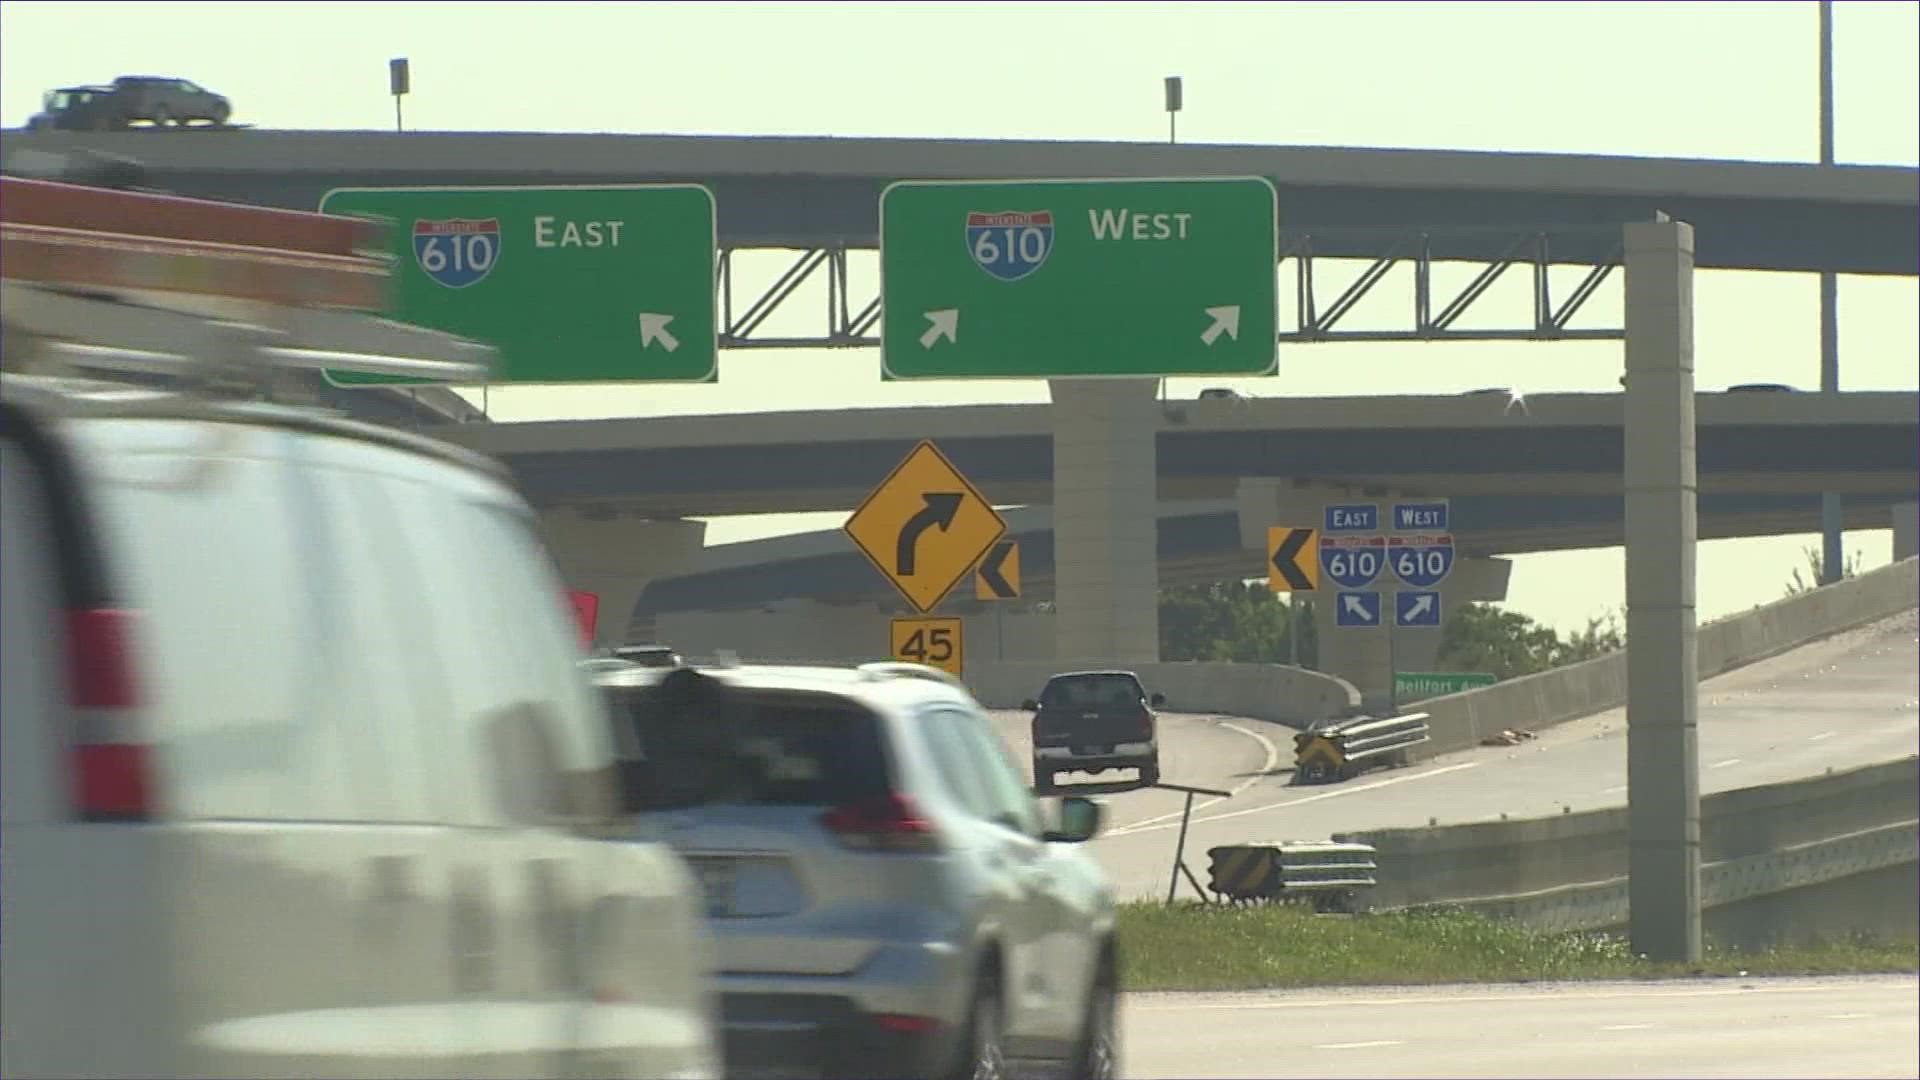 TxDOT said the work is necessary to complete and tie into the partially completed connector ramps already built as a part of the SH 288 Express Toll Lane project.